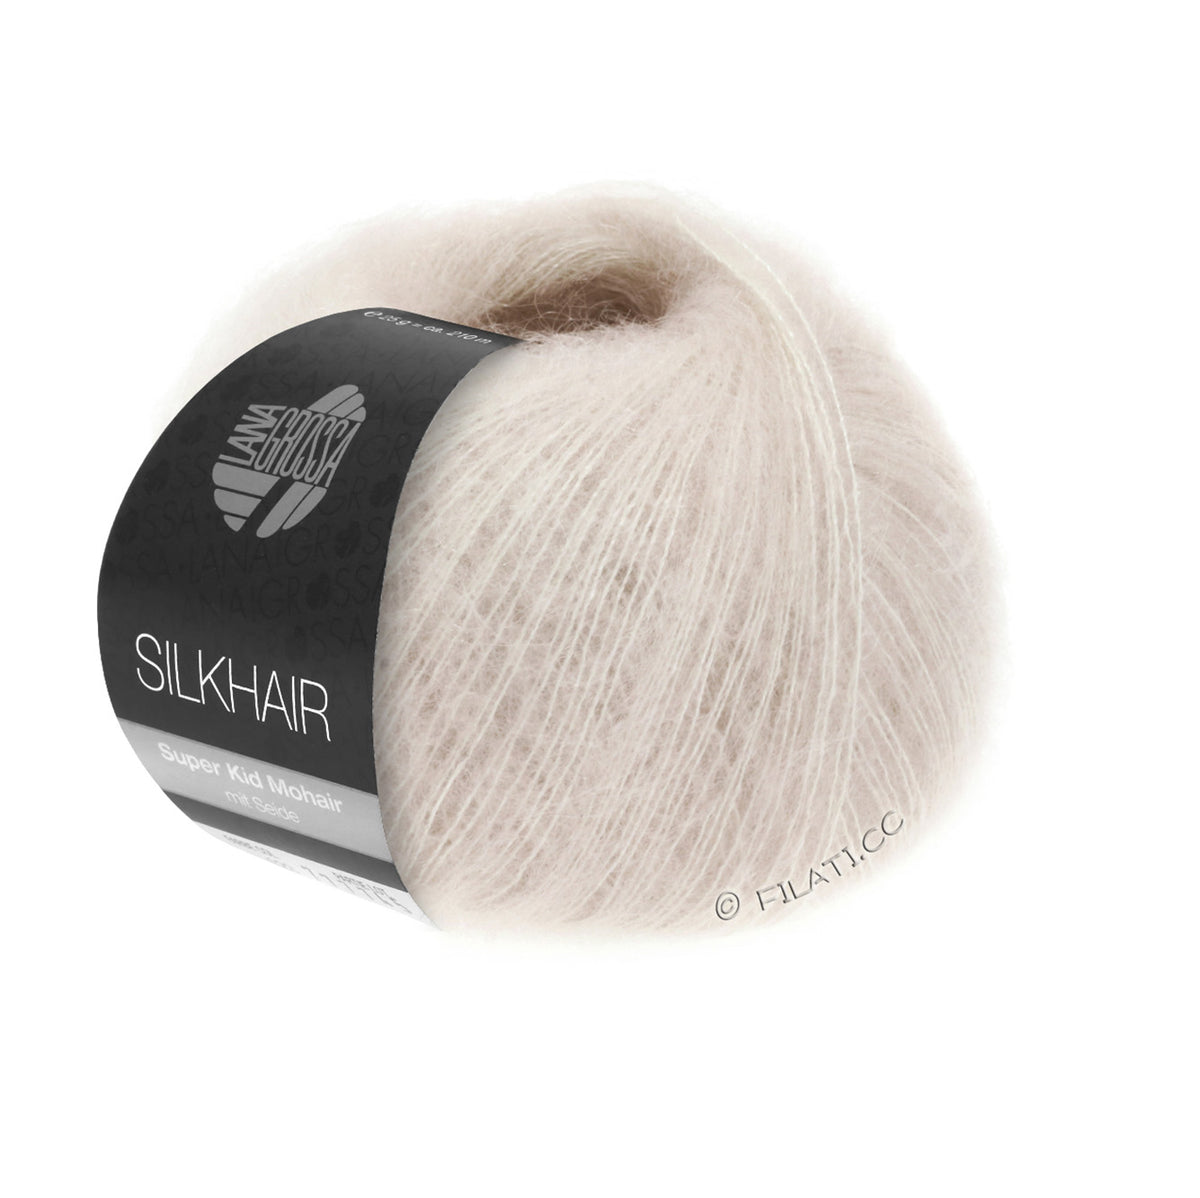 Antage Dominerende ketcher Silkhair Lana Grossa – Woolstock cotton, wool and coffee